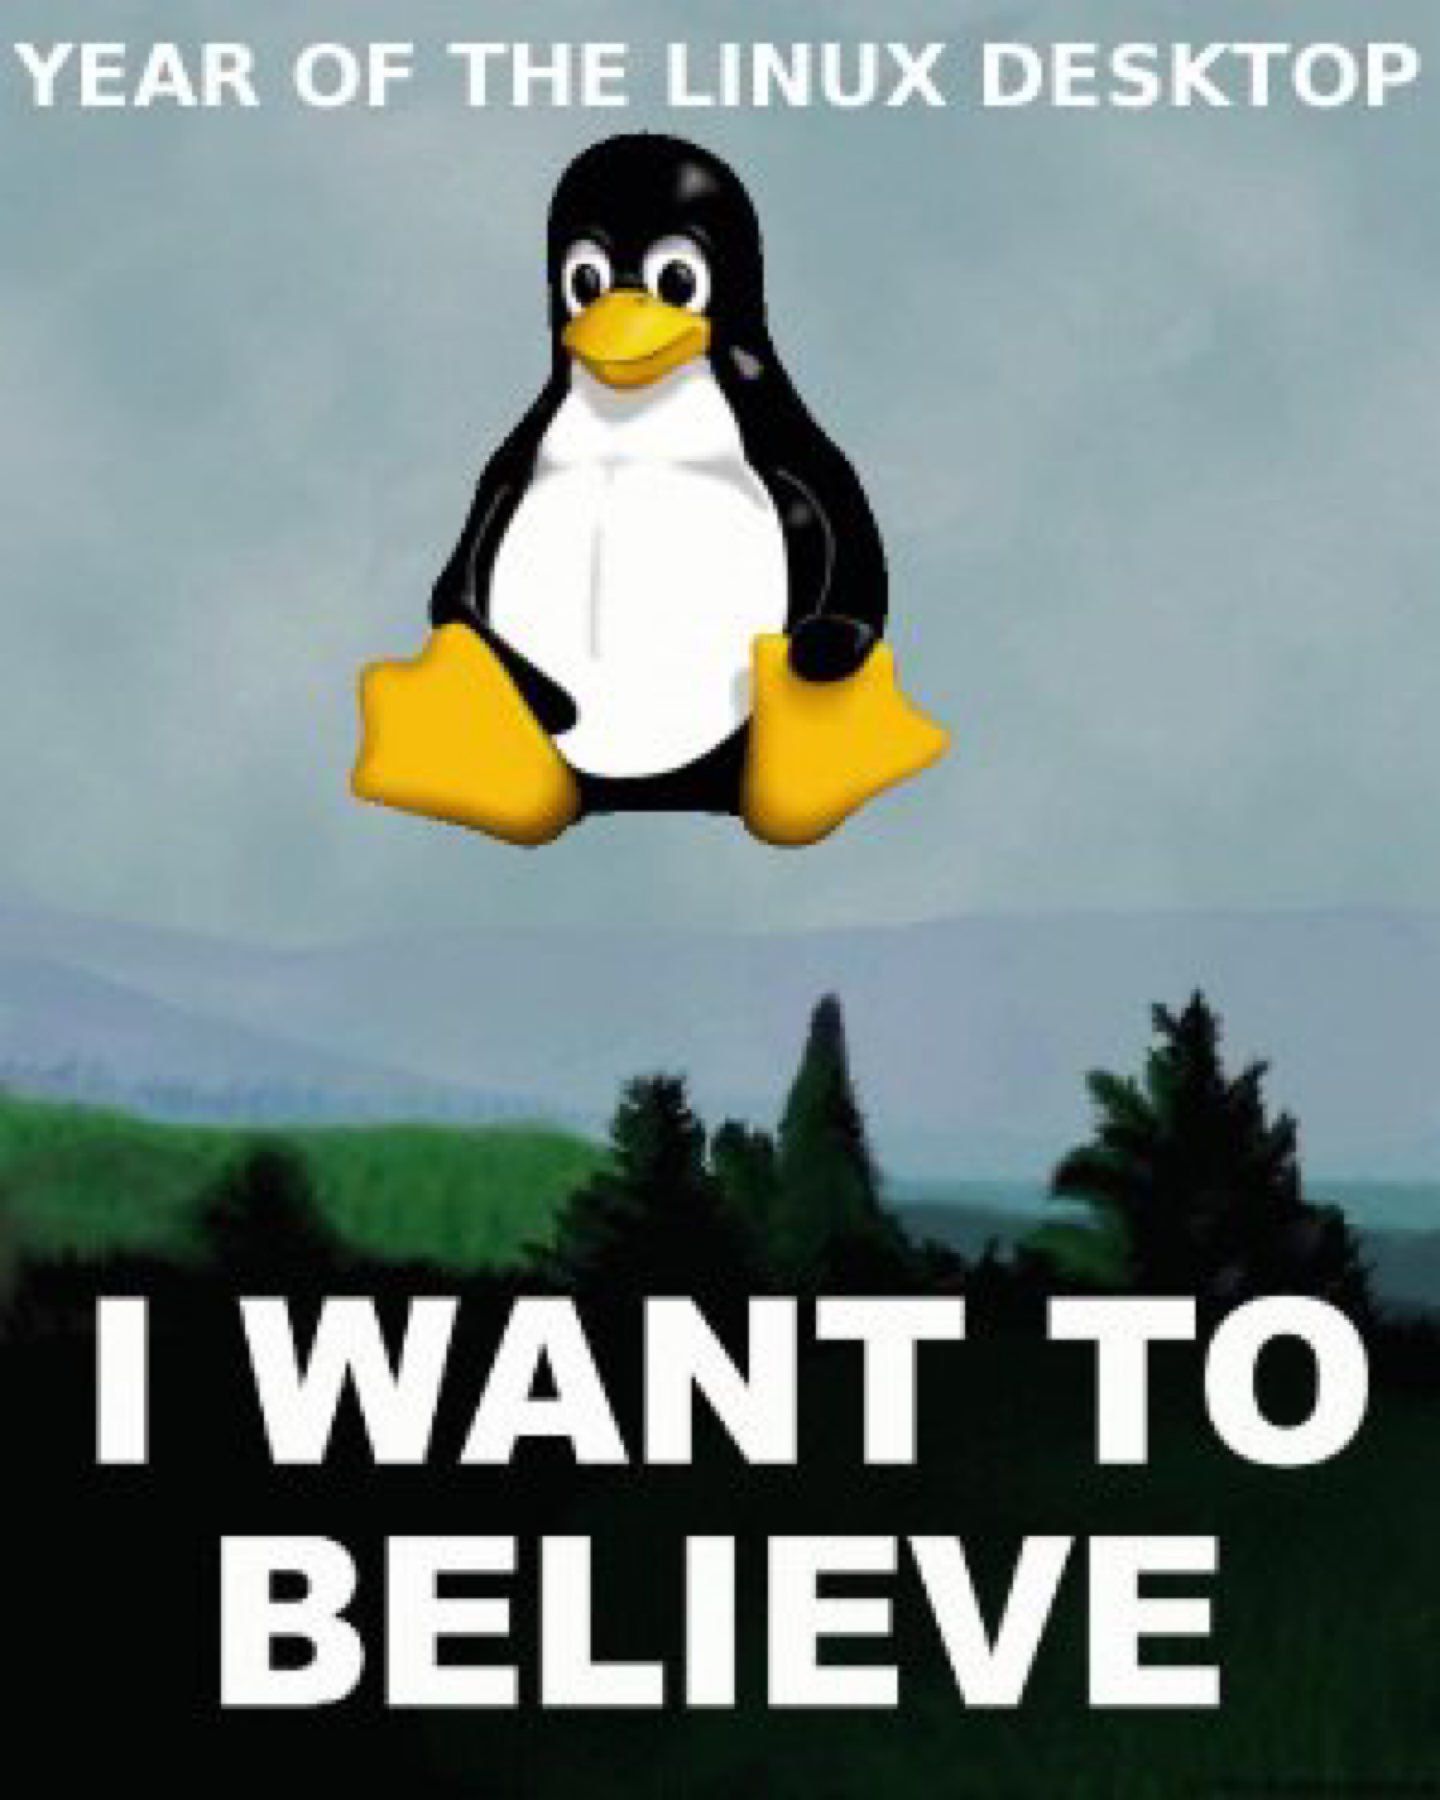 A picture of Tux, the Linux mascot penguin flying over a forest with the words "year of Linux on the desktop. I want to believe." as a parody of a poster associated with the 1990s TV show The X-Files.